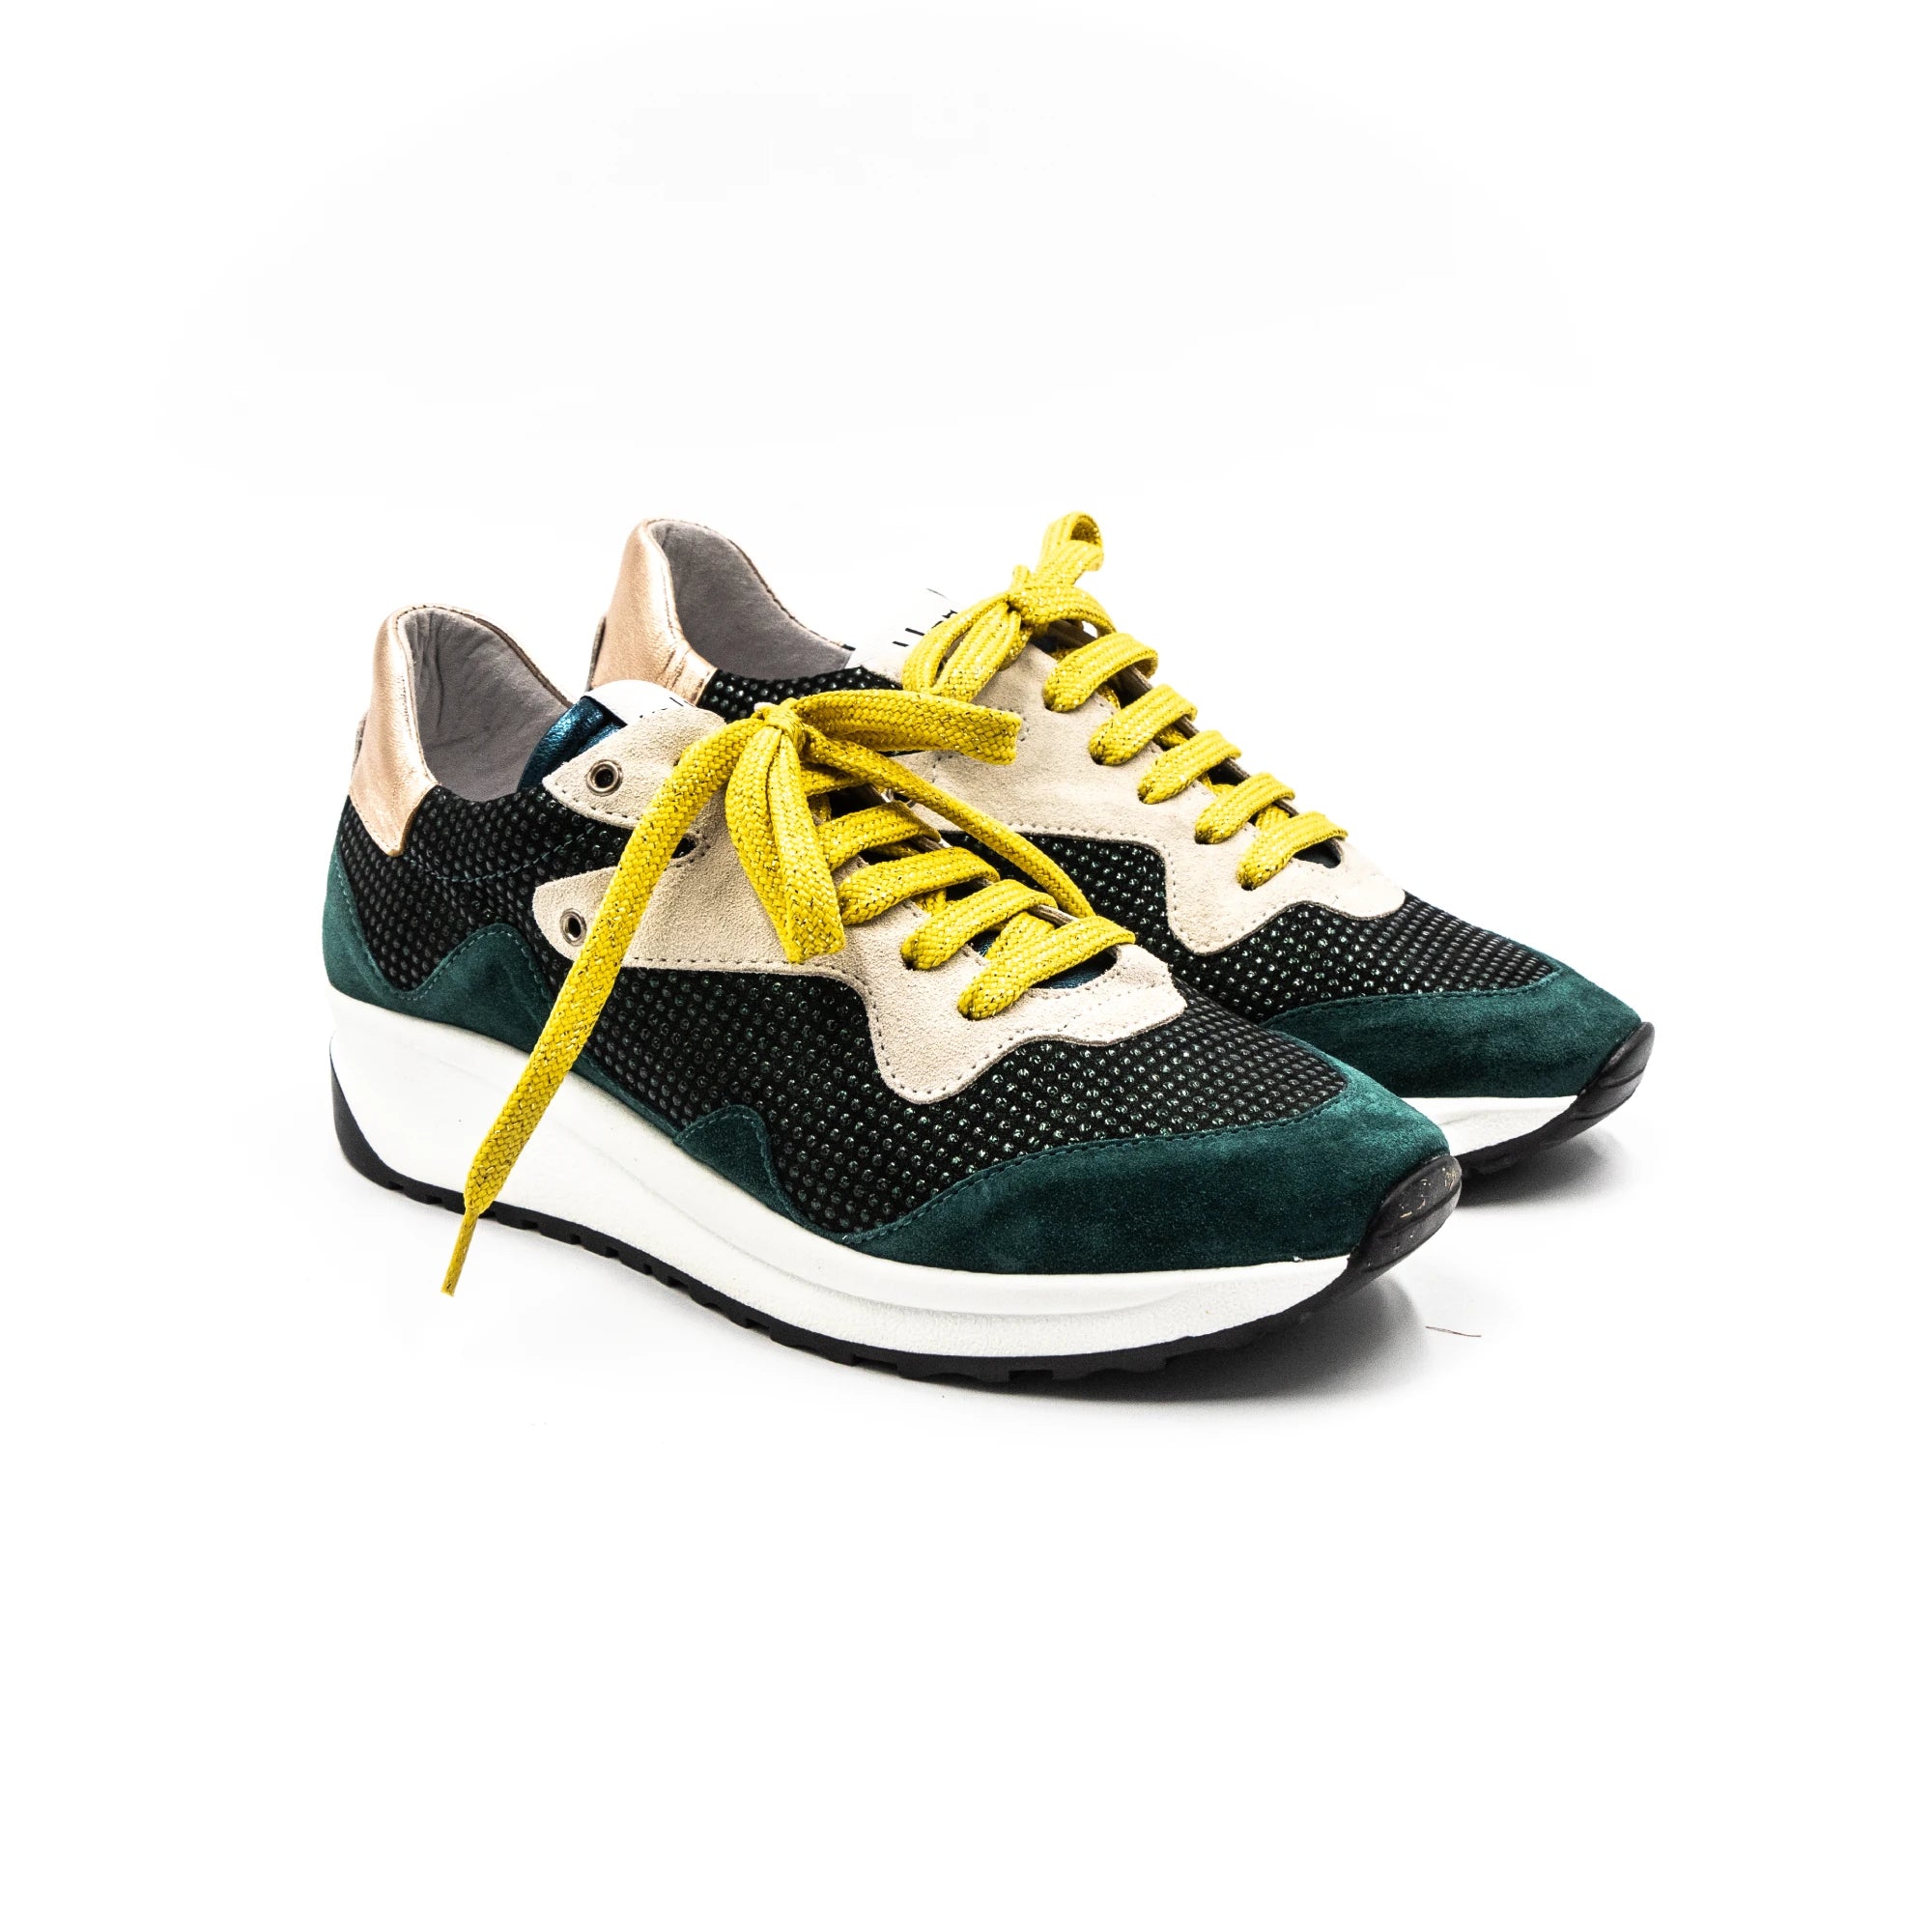 Green sneakers with yellow laces.